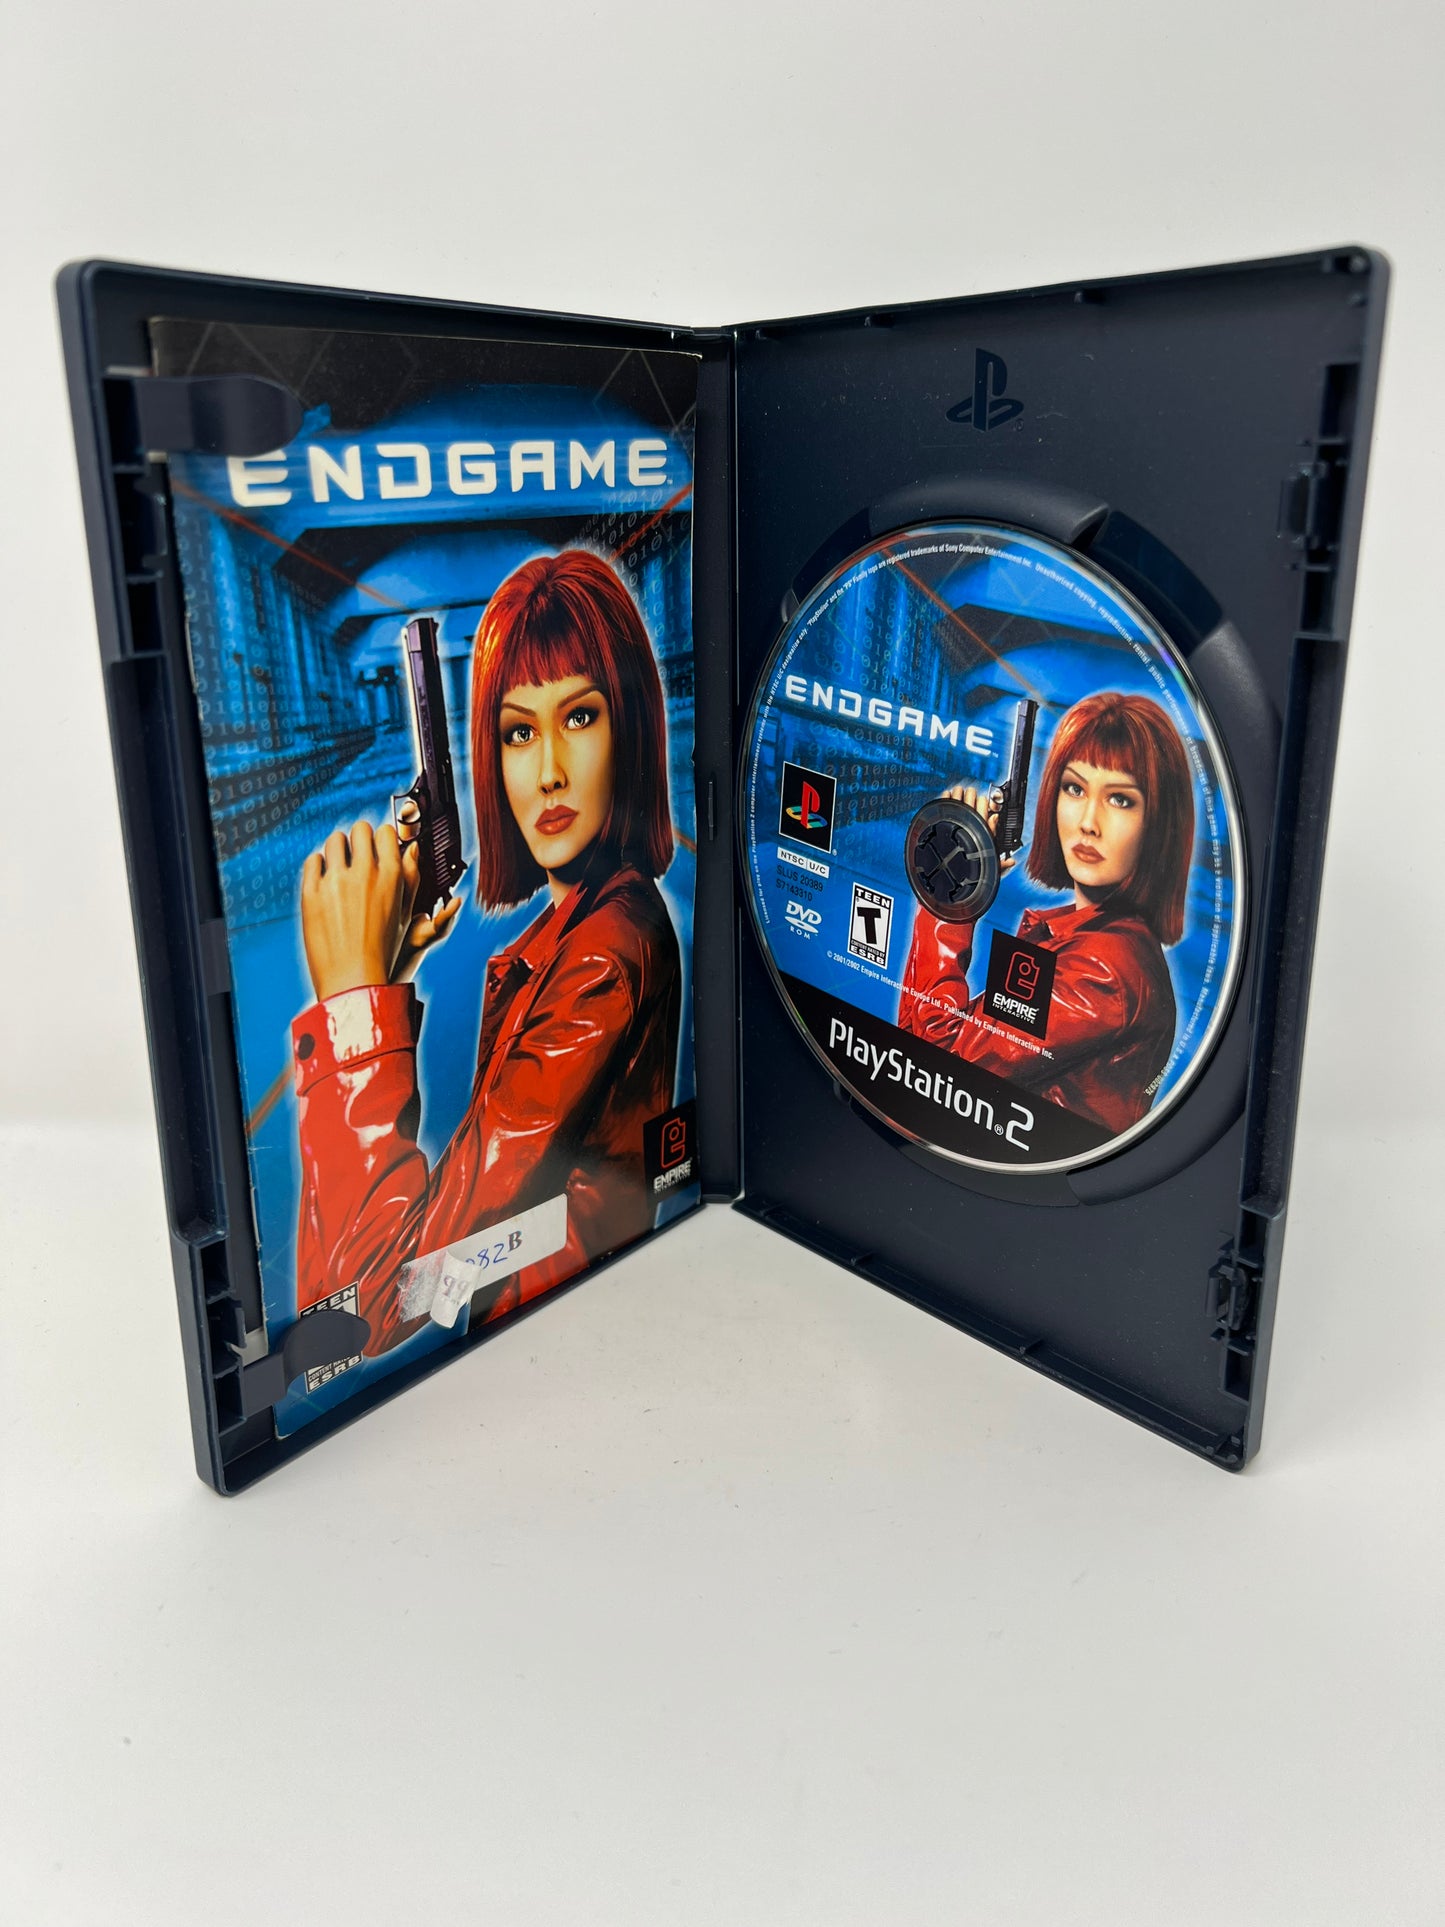 Endgame - PS2 Game - Used